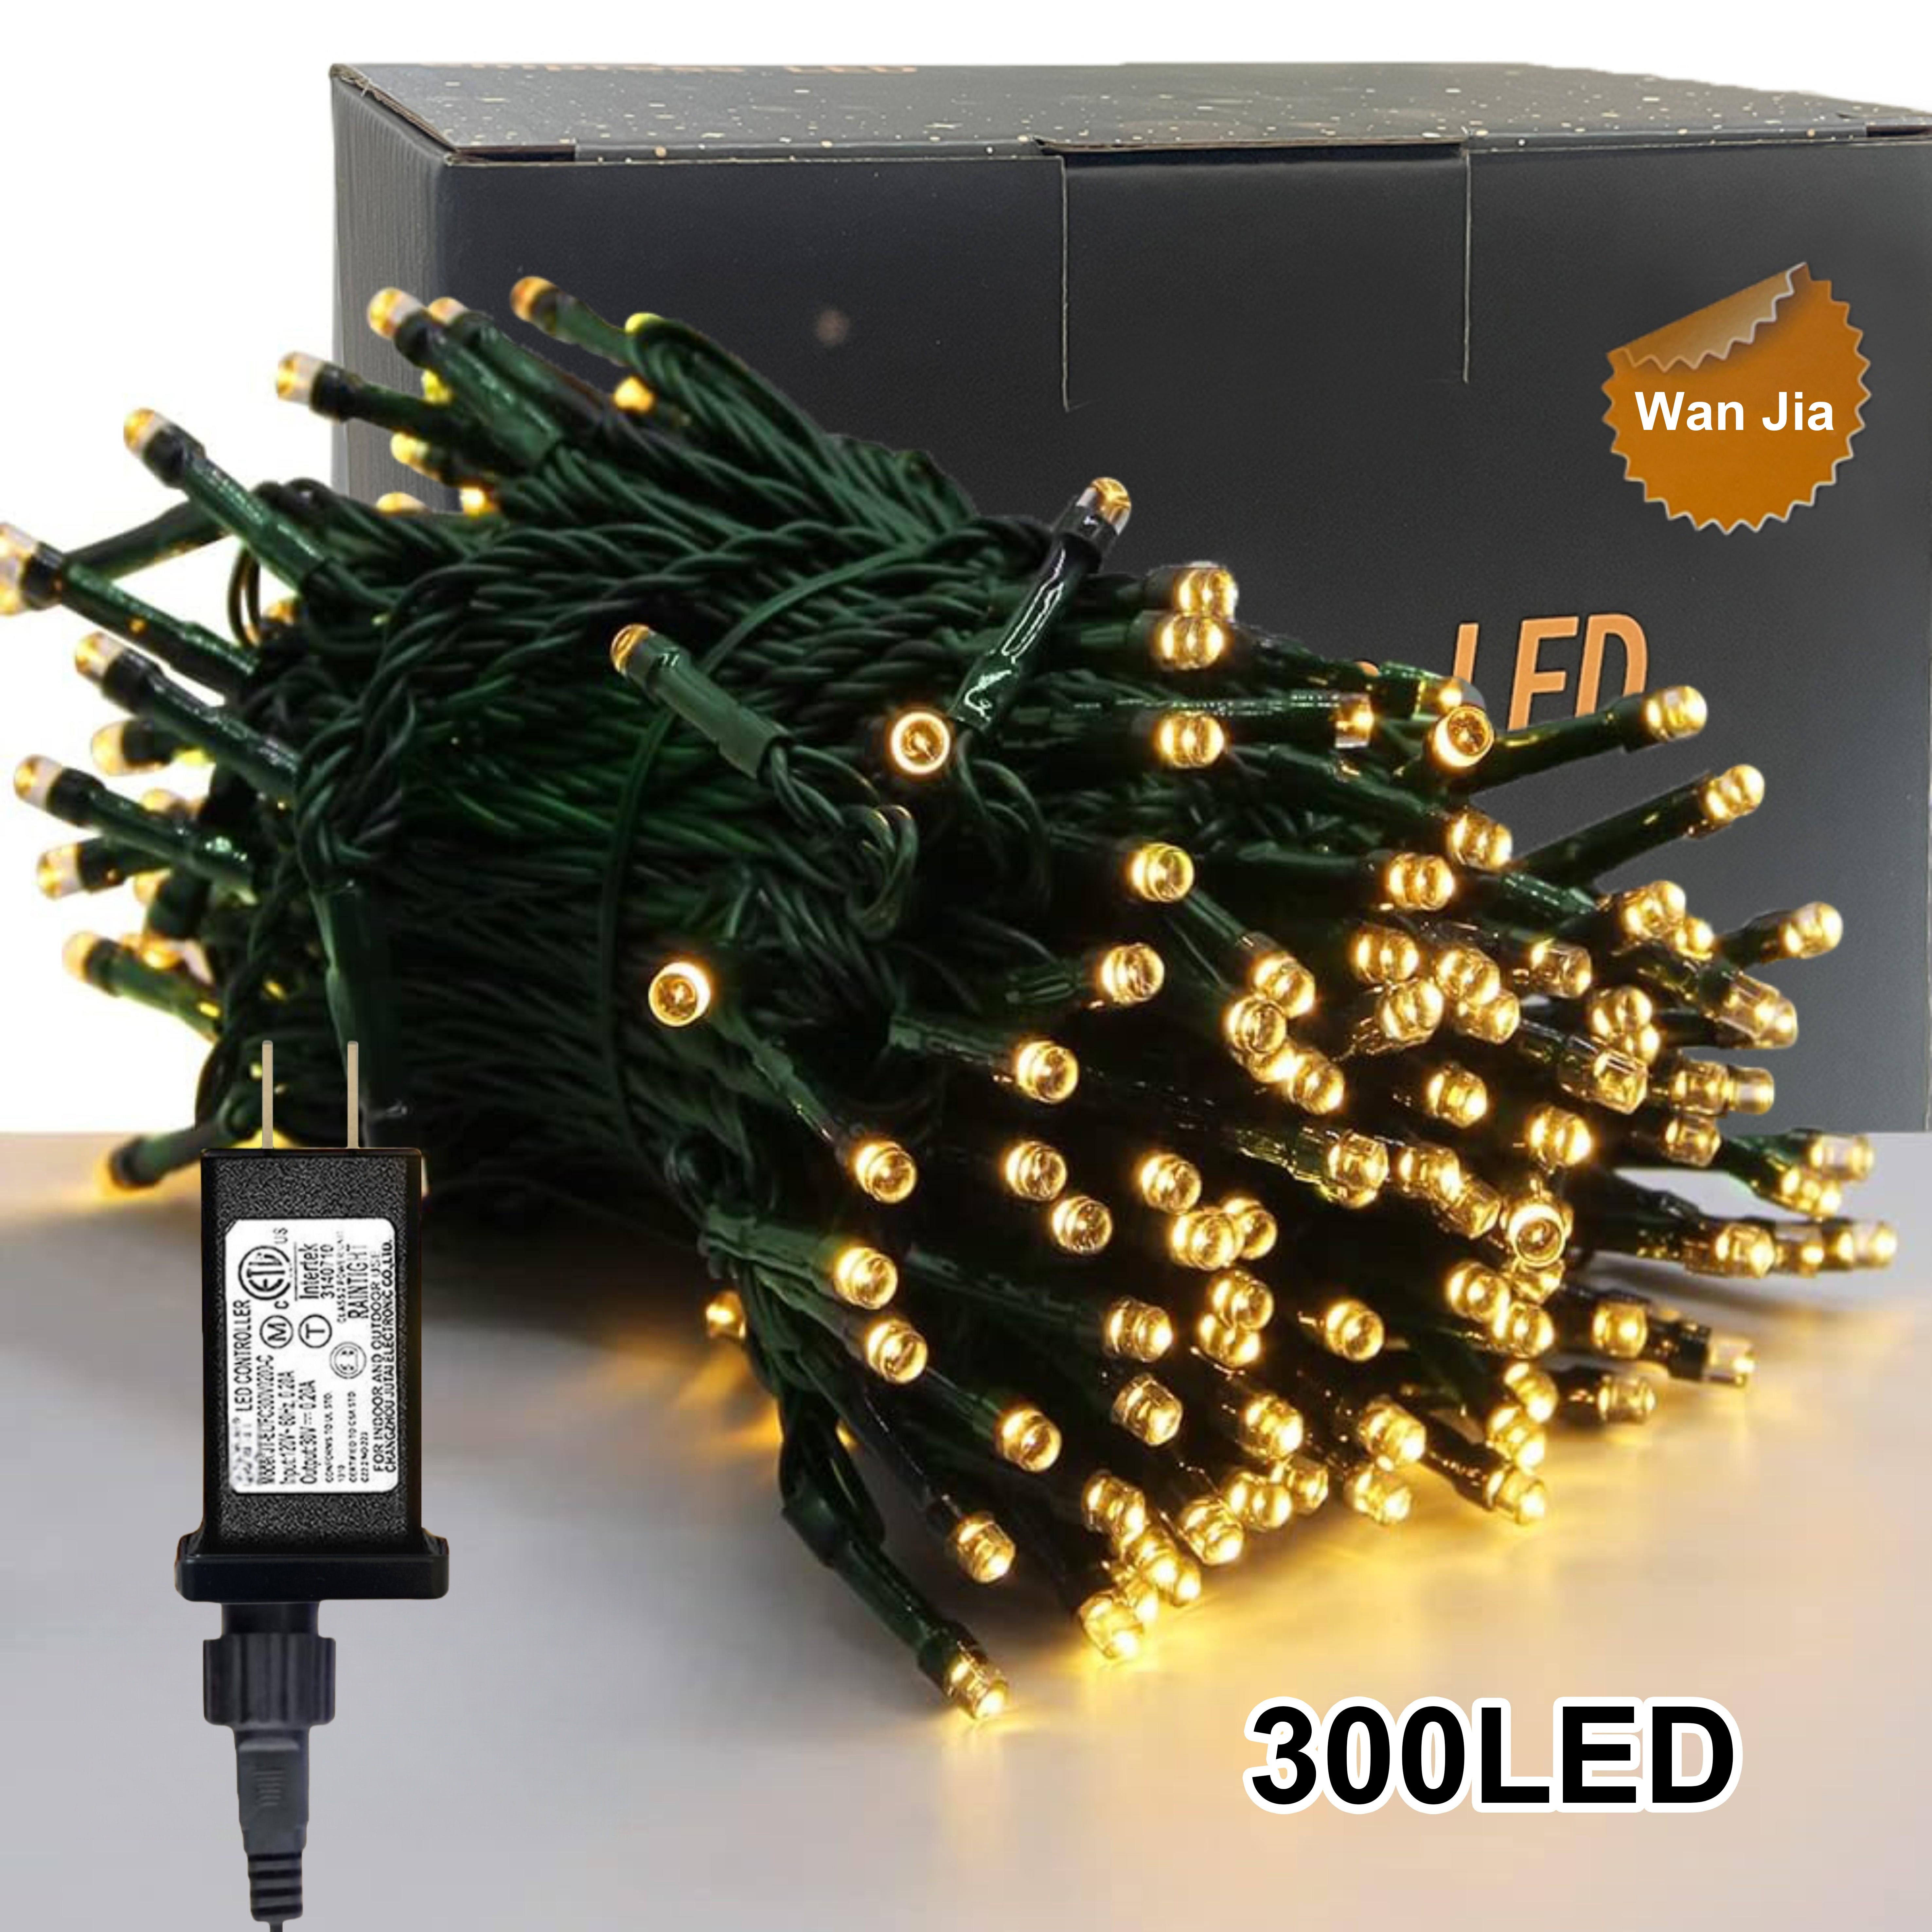  Battery Operated Christmas Lights 2 Pack 18 Feet 50 LED Clear  Mini String Lights with 8 Modes Waterproof Tree Lights for Xmas Outdoor  Indoor Holiday Party Garden Decor, Warm White +